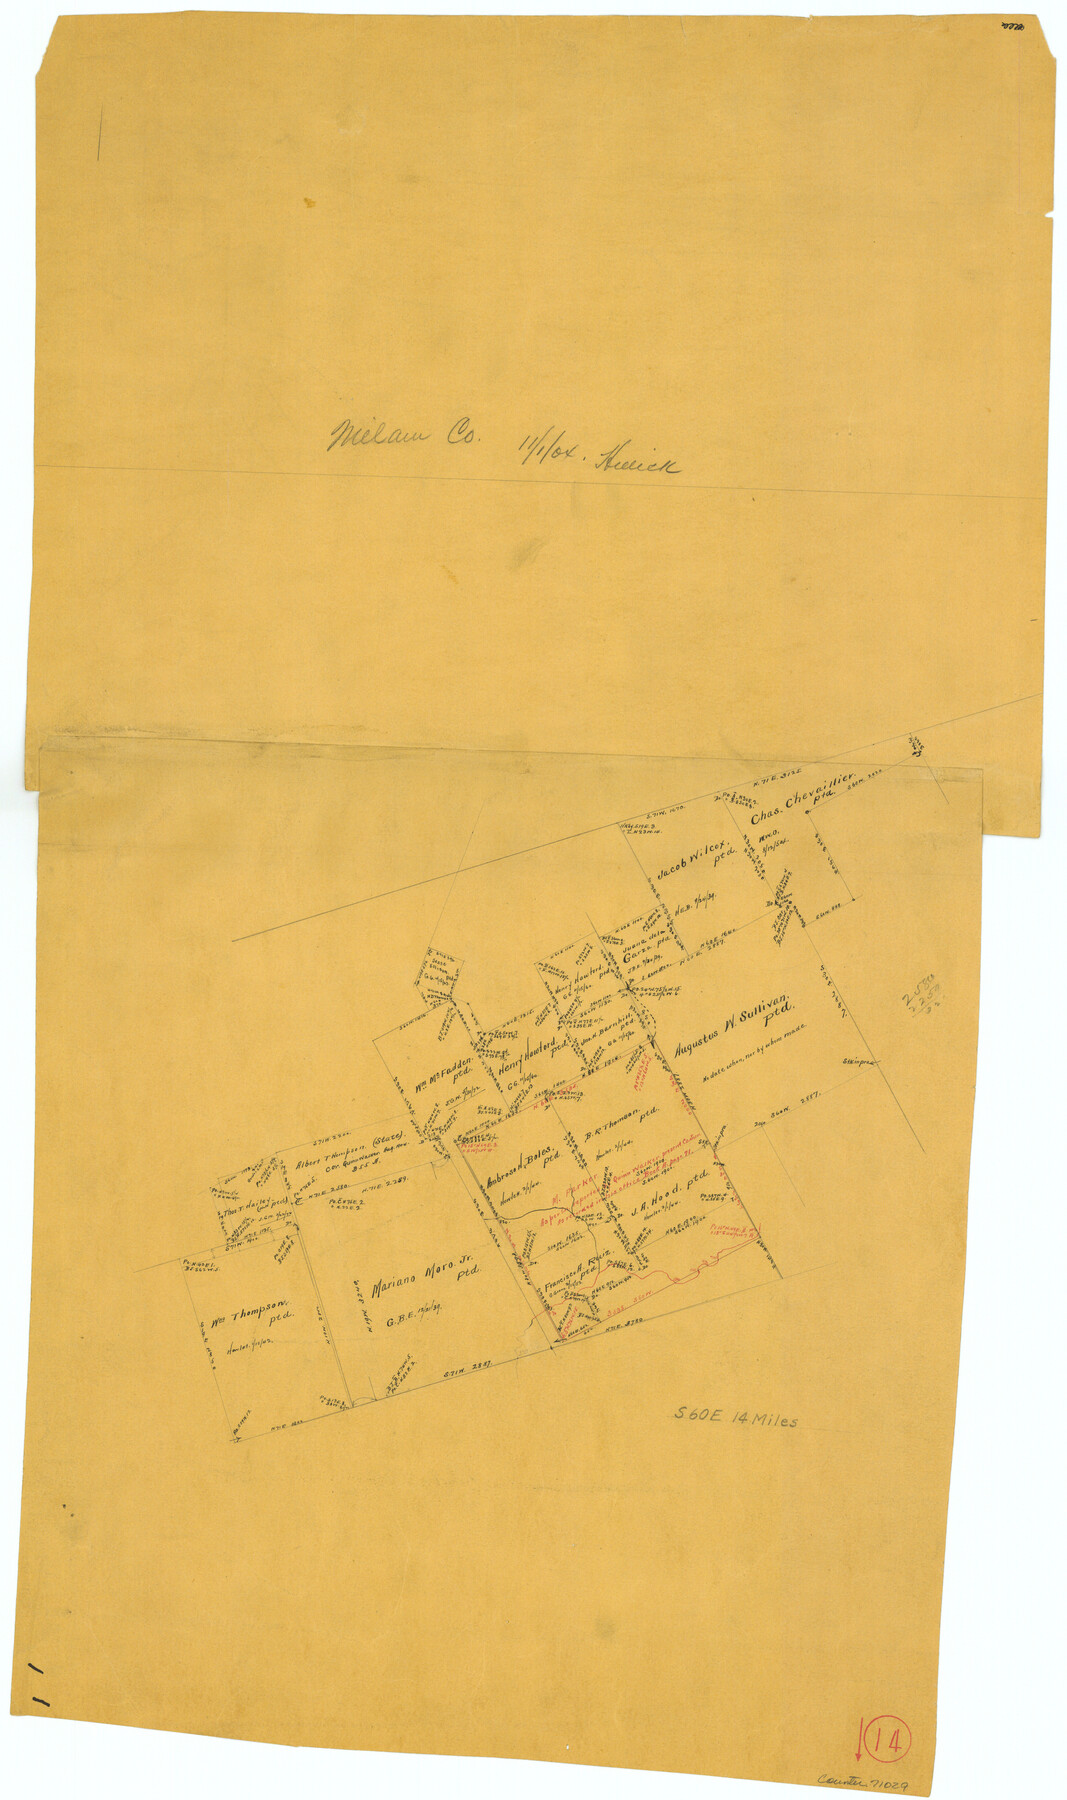 71029, Milam County Working Sketch 14, General Map Collection